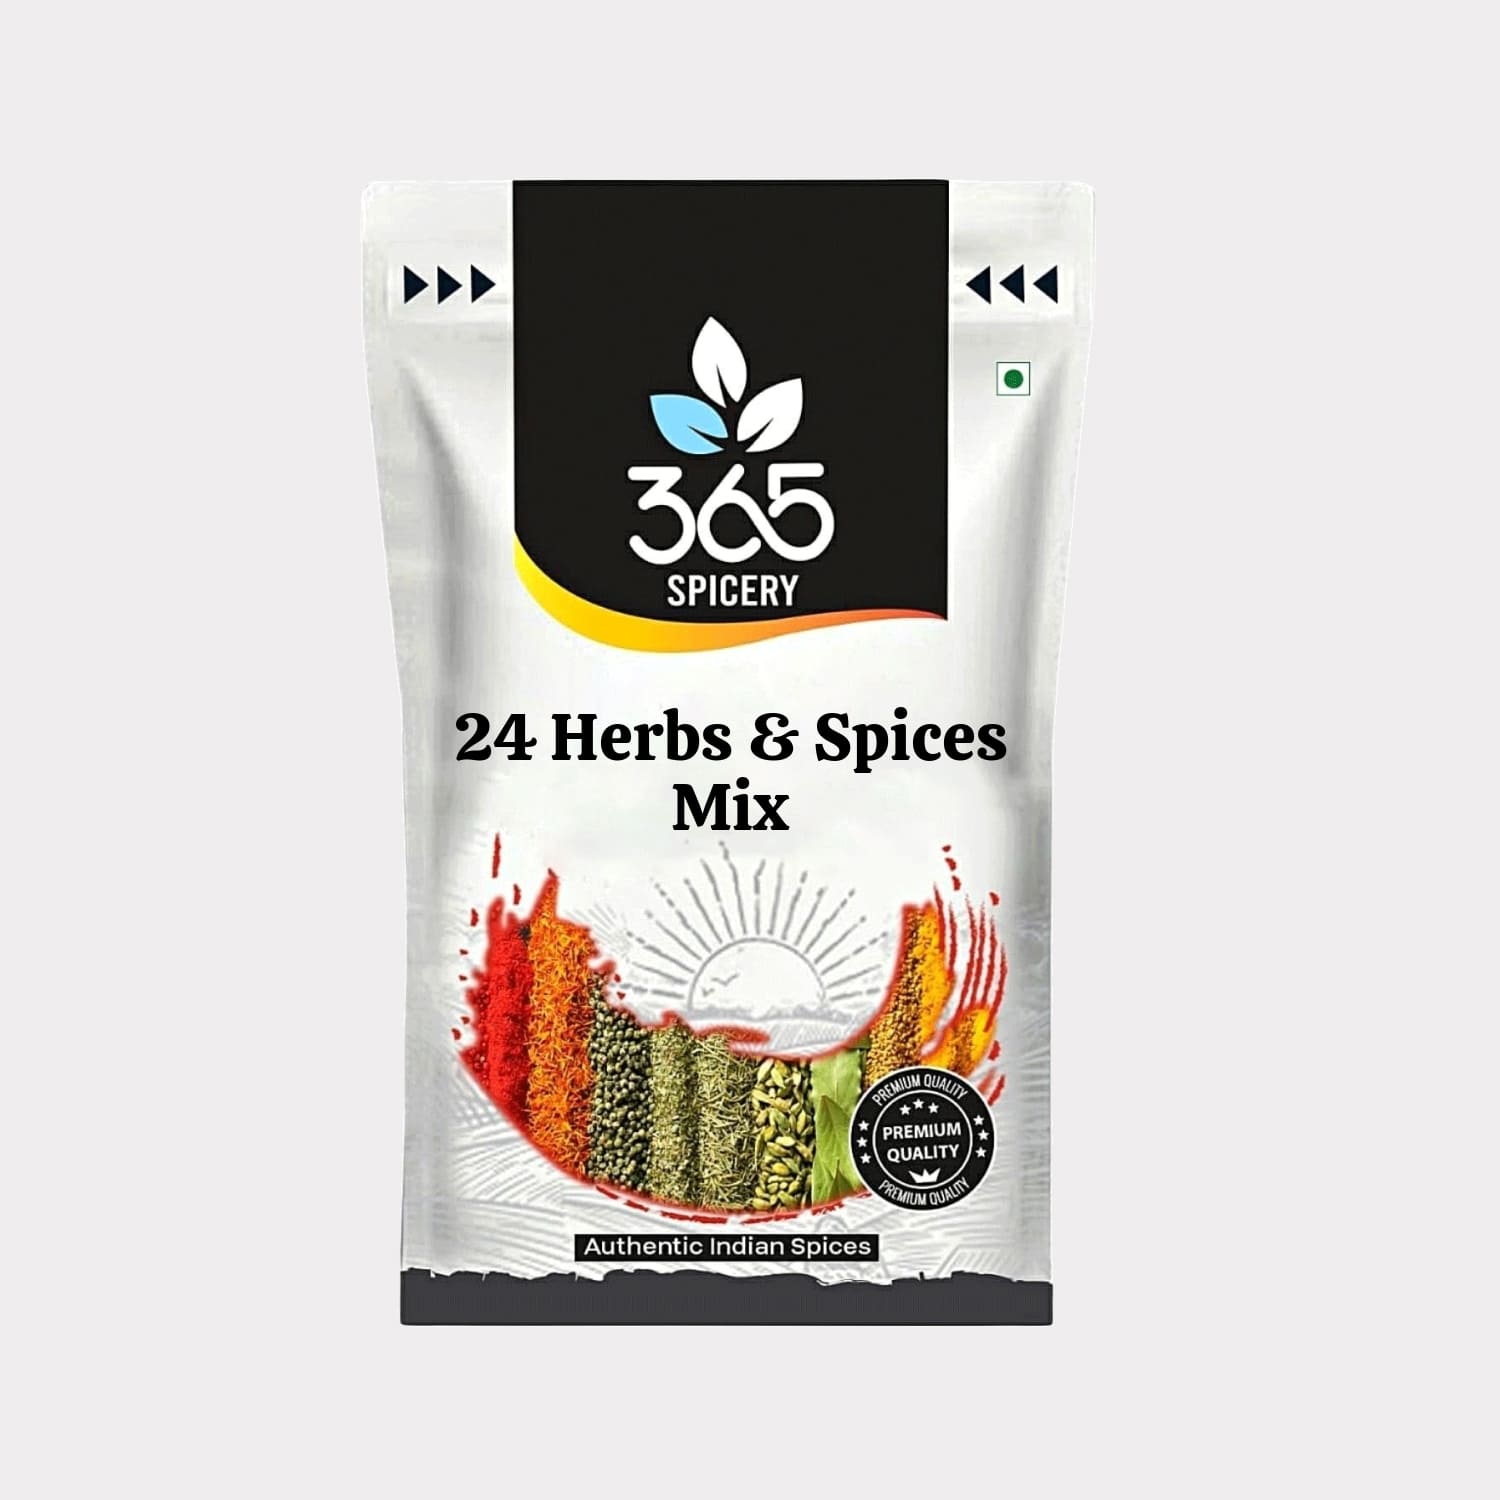 24 Herbs & Spices Mix